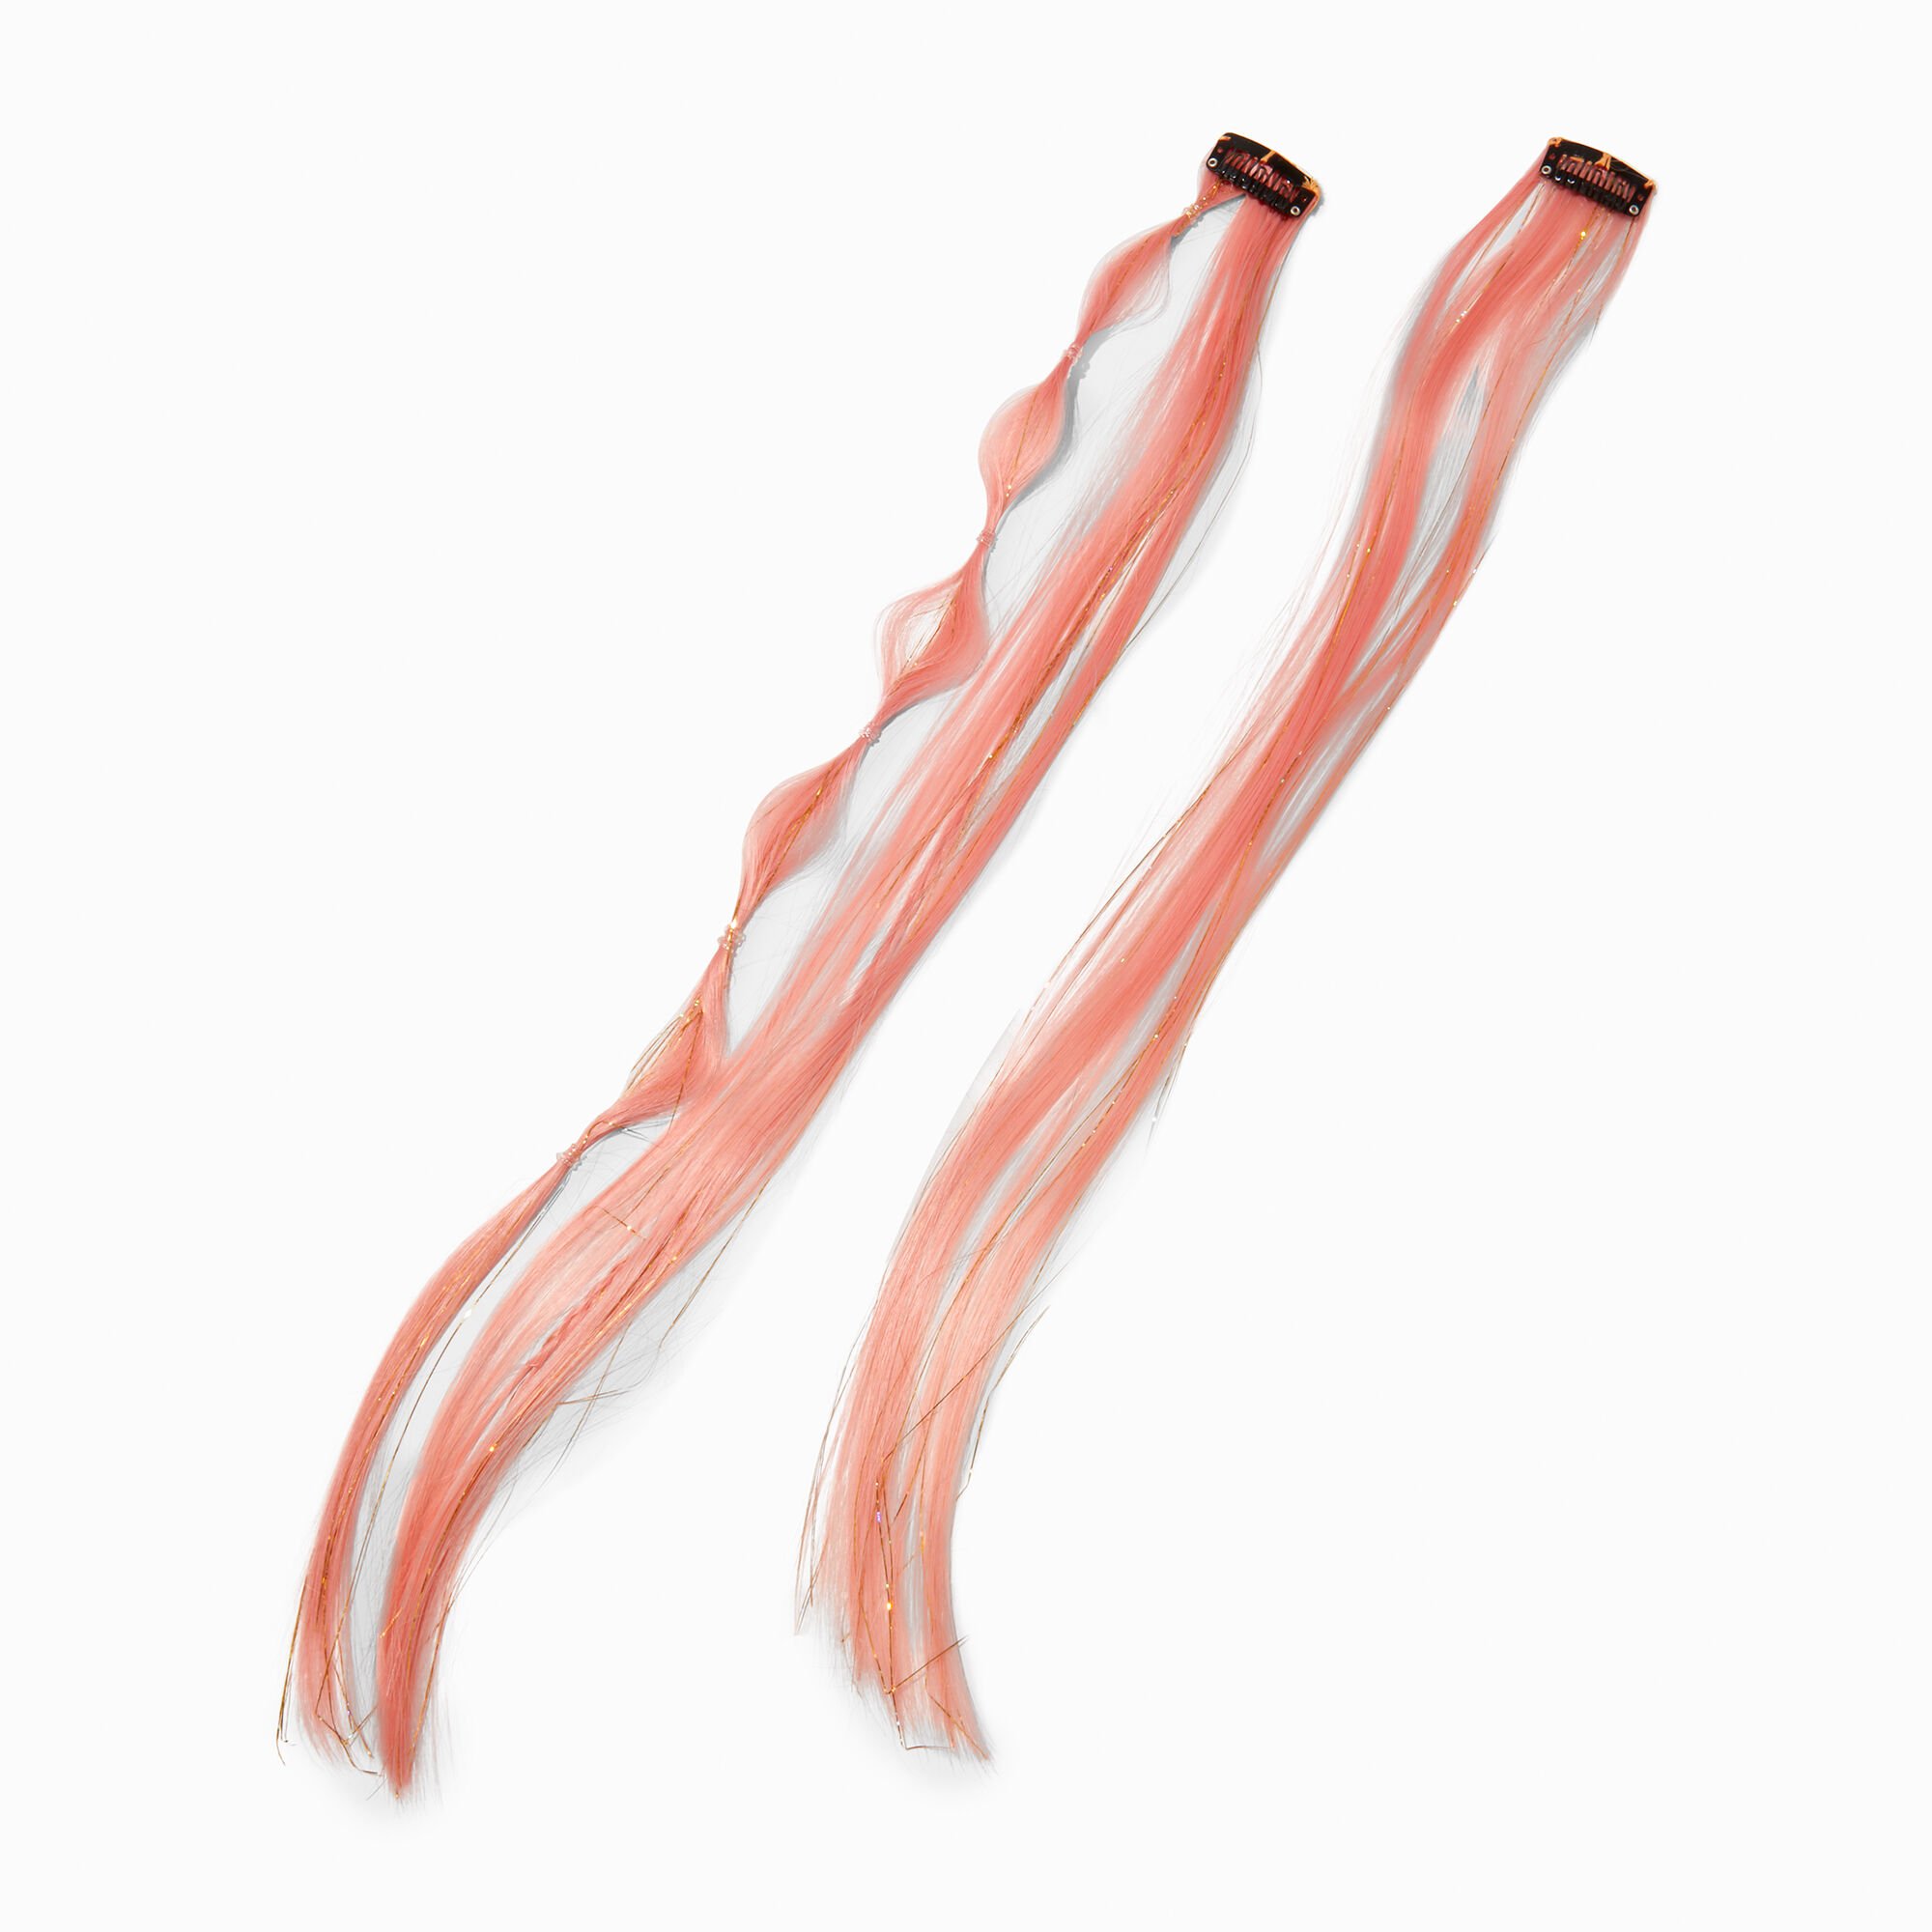 View Claires Bubble Braid Straight Faux Hair Clip In Extensions 2 Pack Peach information